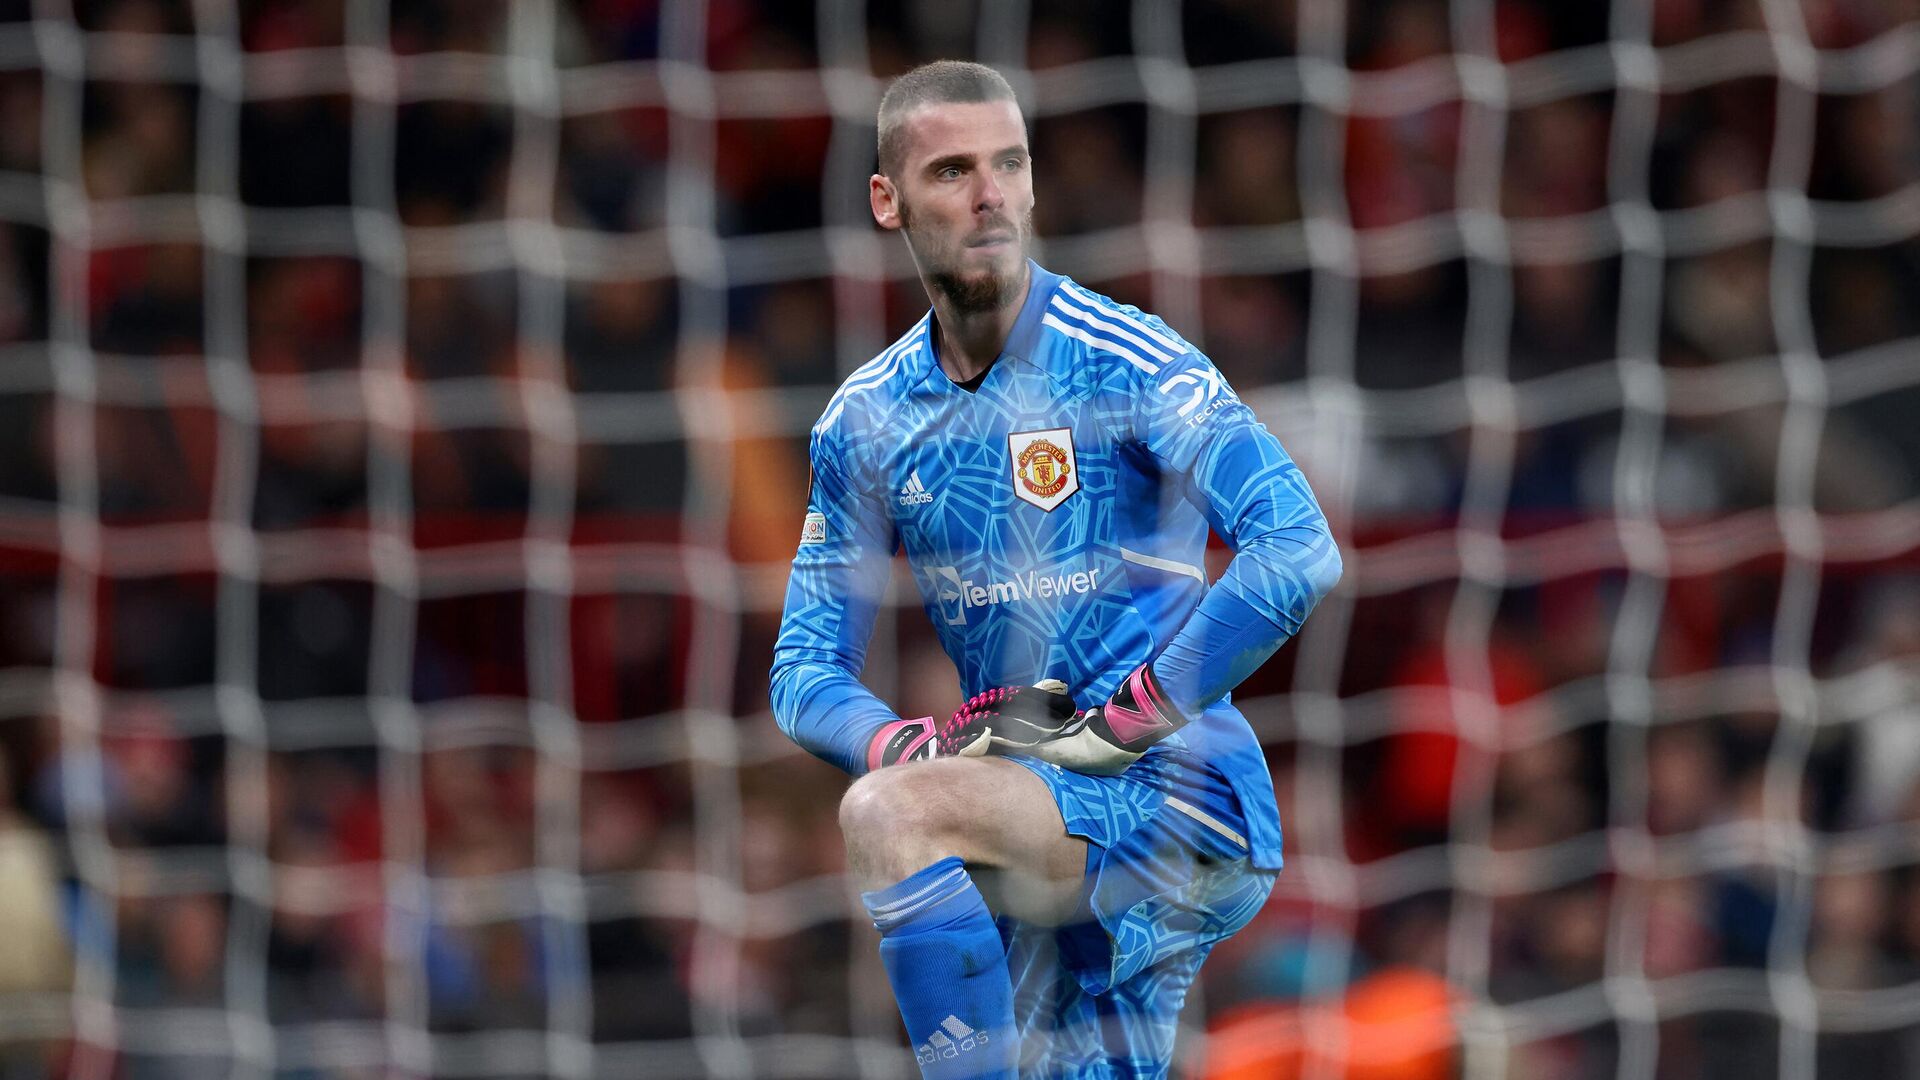 Unemployed star Why doesn’t anyone need one of the best goalkeepers in the world?